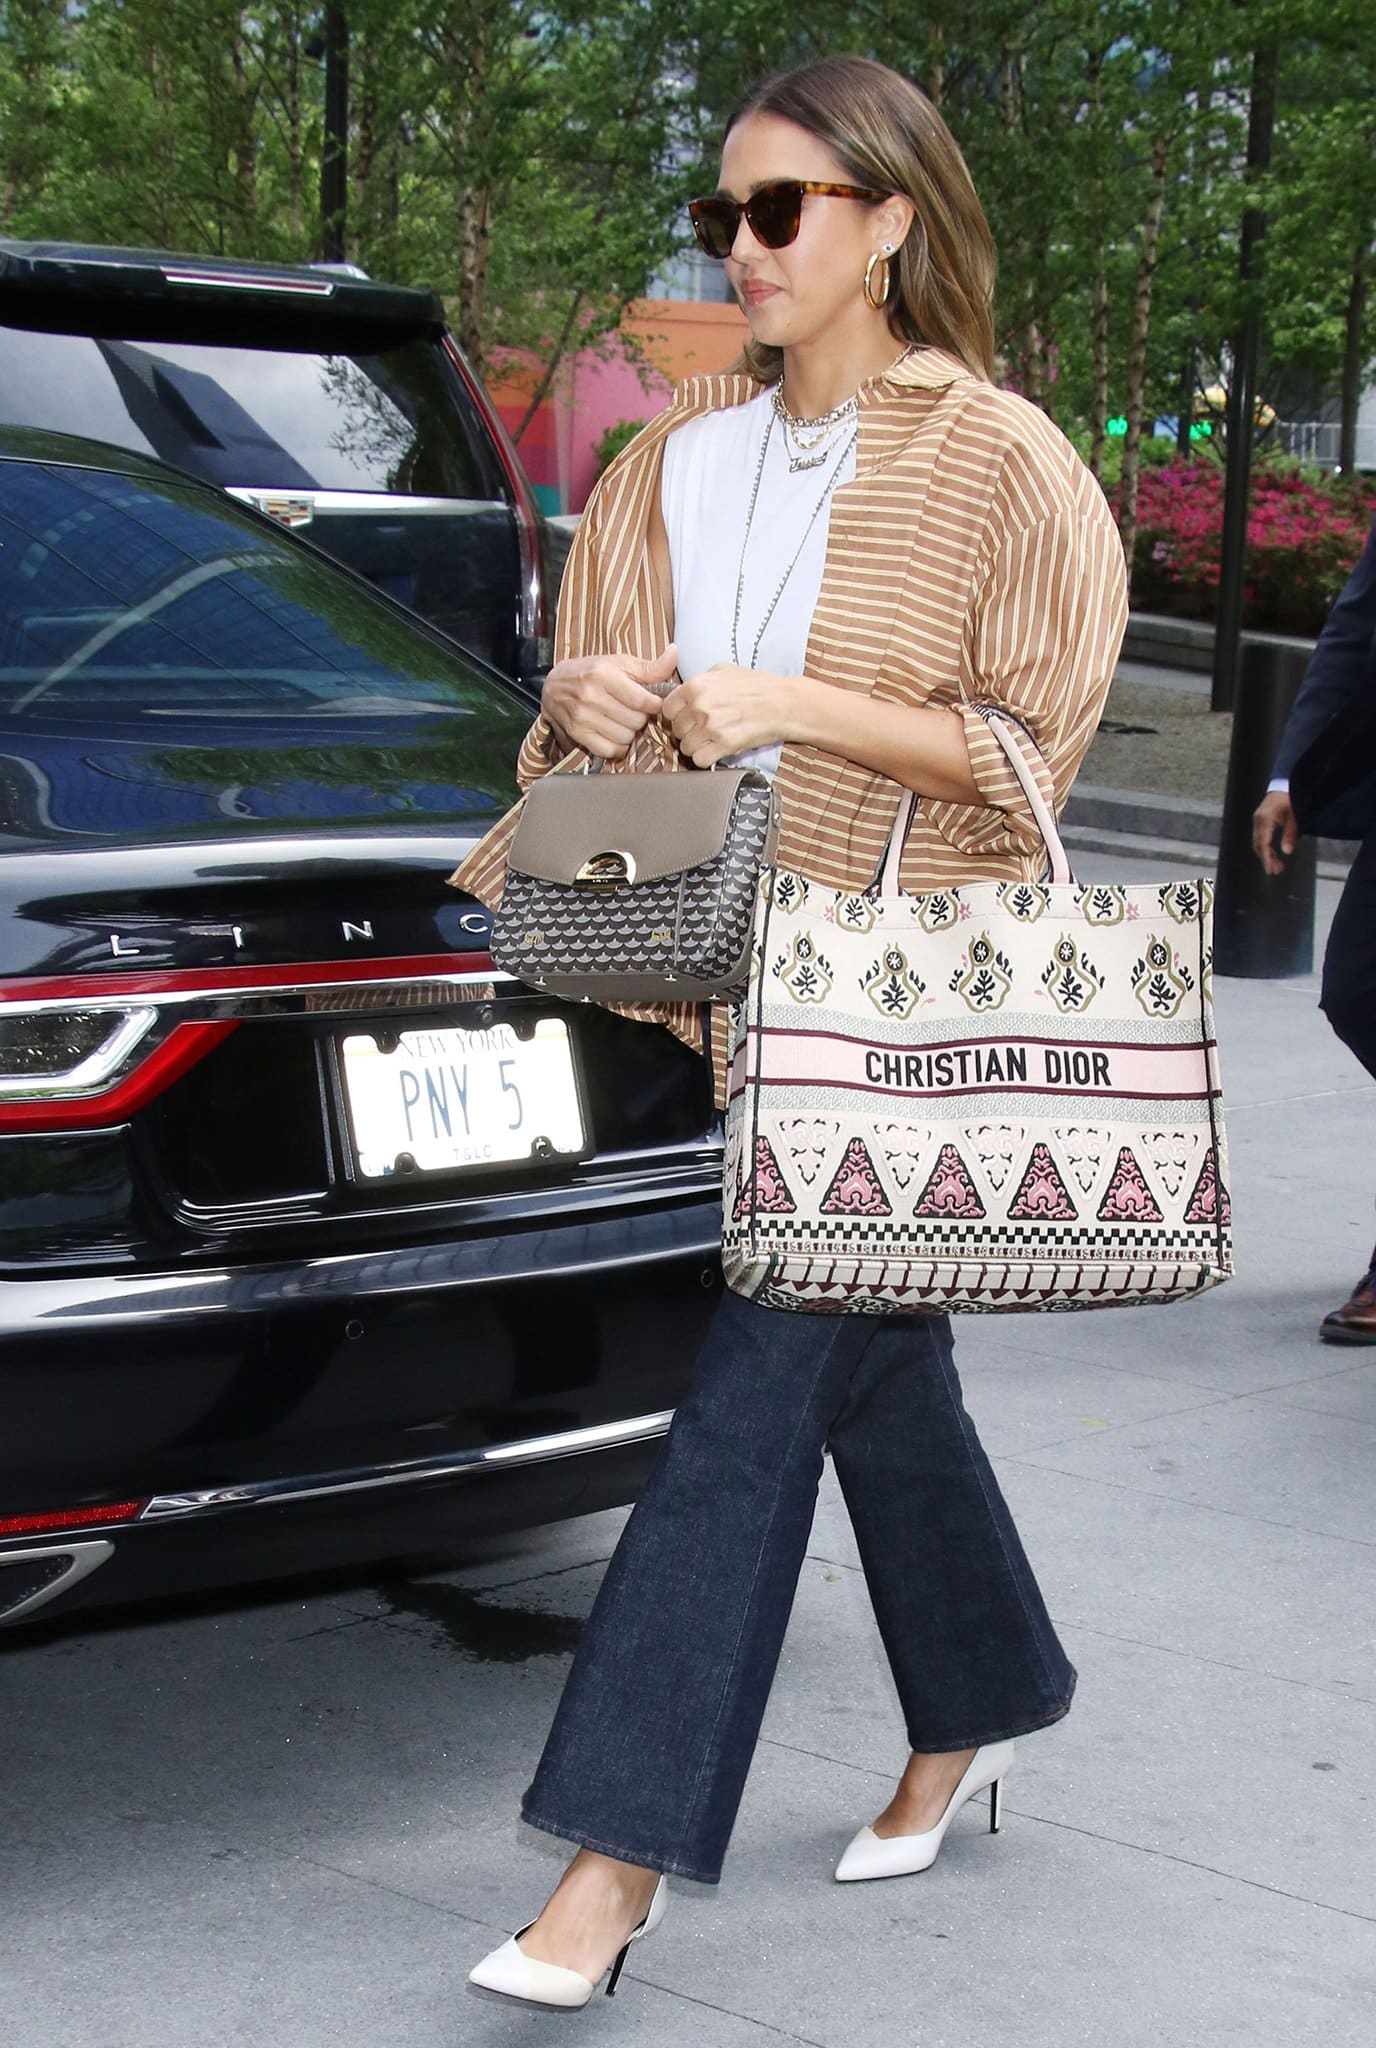 Jessica Alba opts for business-casual in a white tee, Dissh's striped shirt, and flared jeans